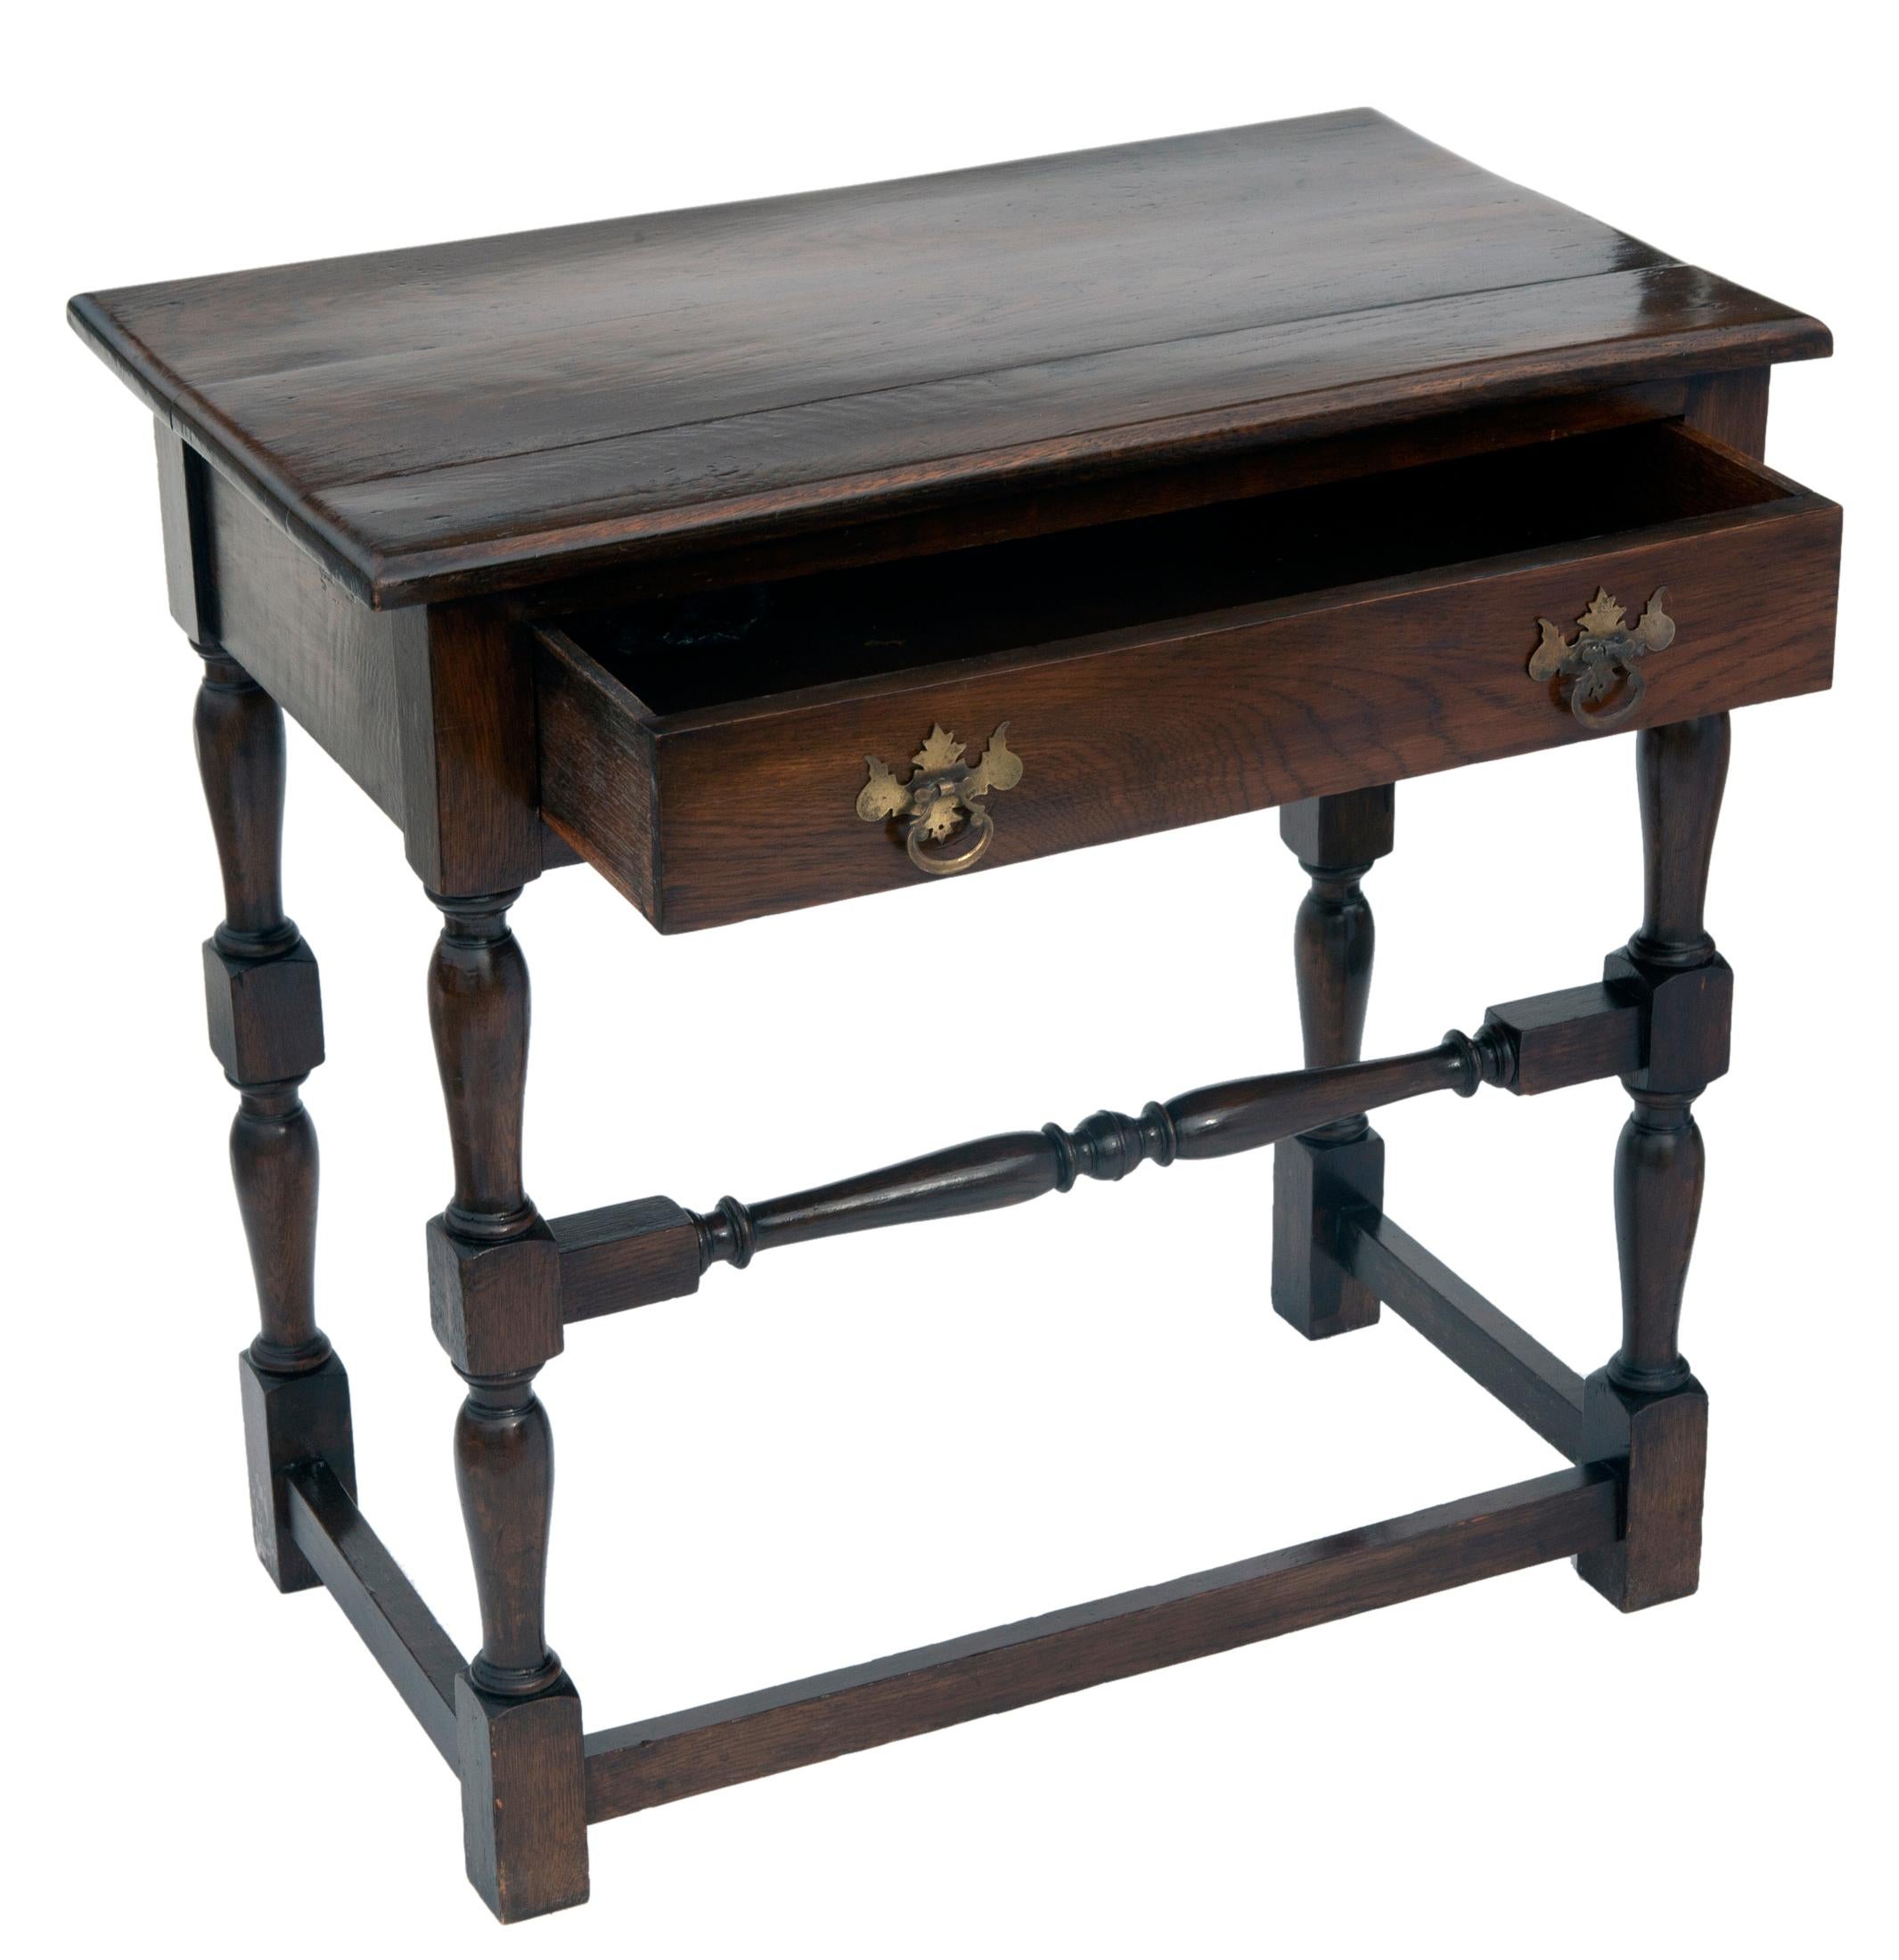 19th century English oak side table with softly curved edge around the top,.
Hand pegged construction. The apron is simple and contains a single drawer over turned bobbin legs, joined by a matching stretcher in the front, and simple stretchers on